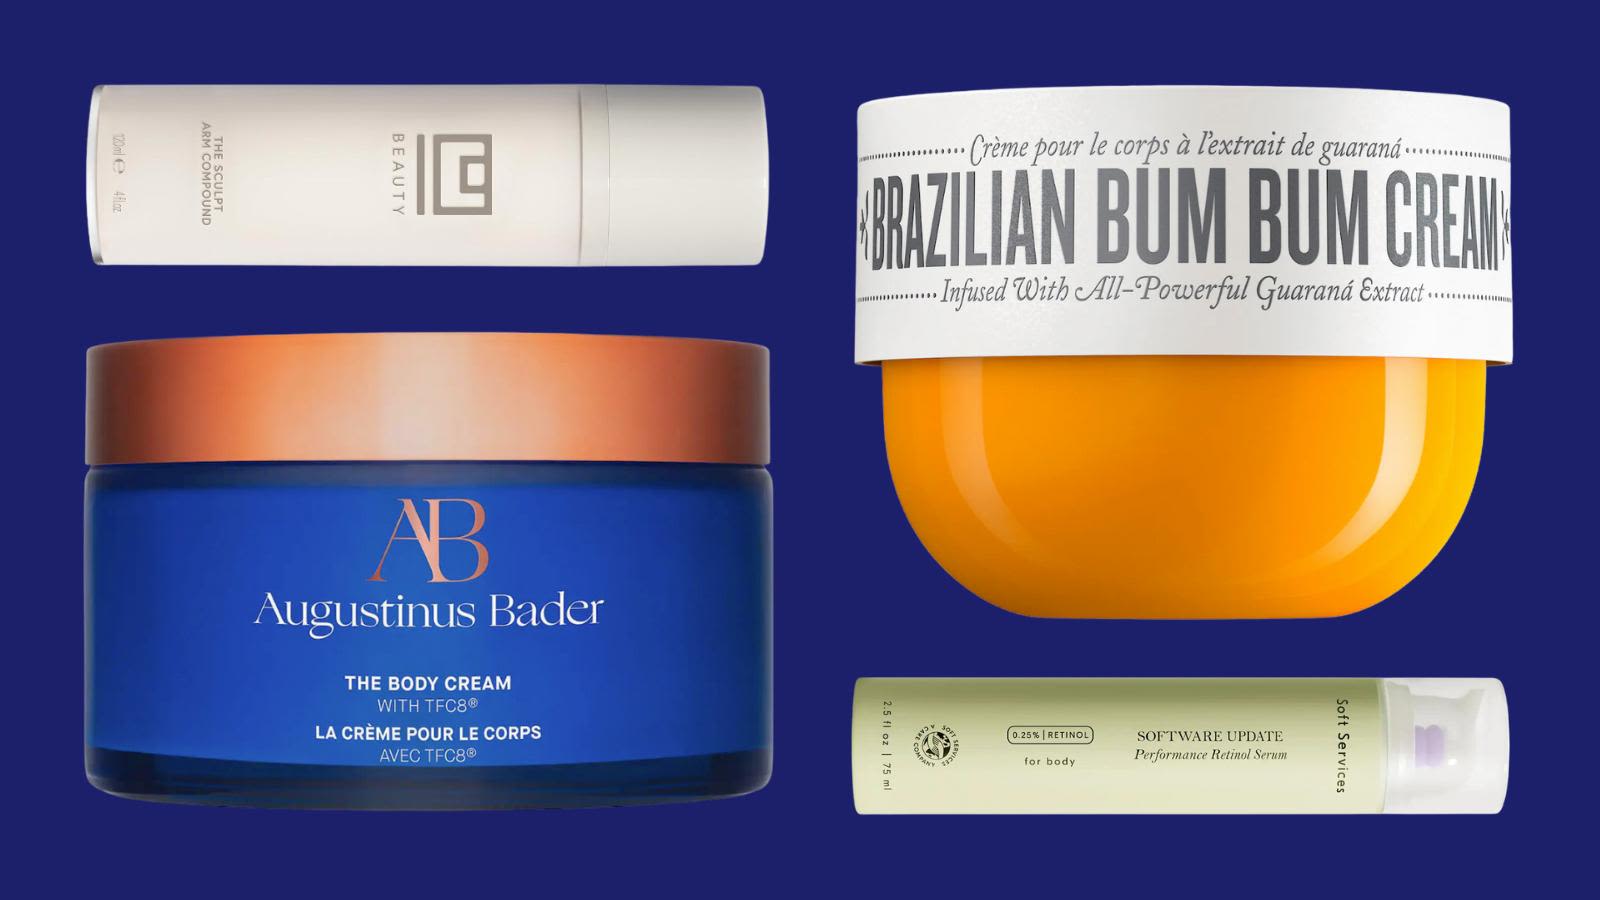 The 9 Best Cellulite Creams, According To Experts